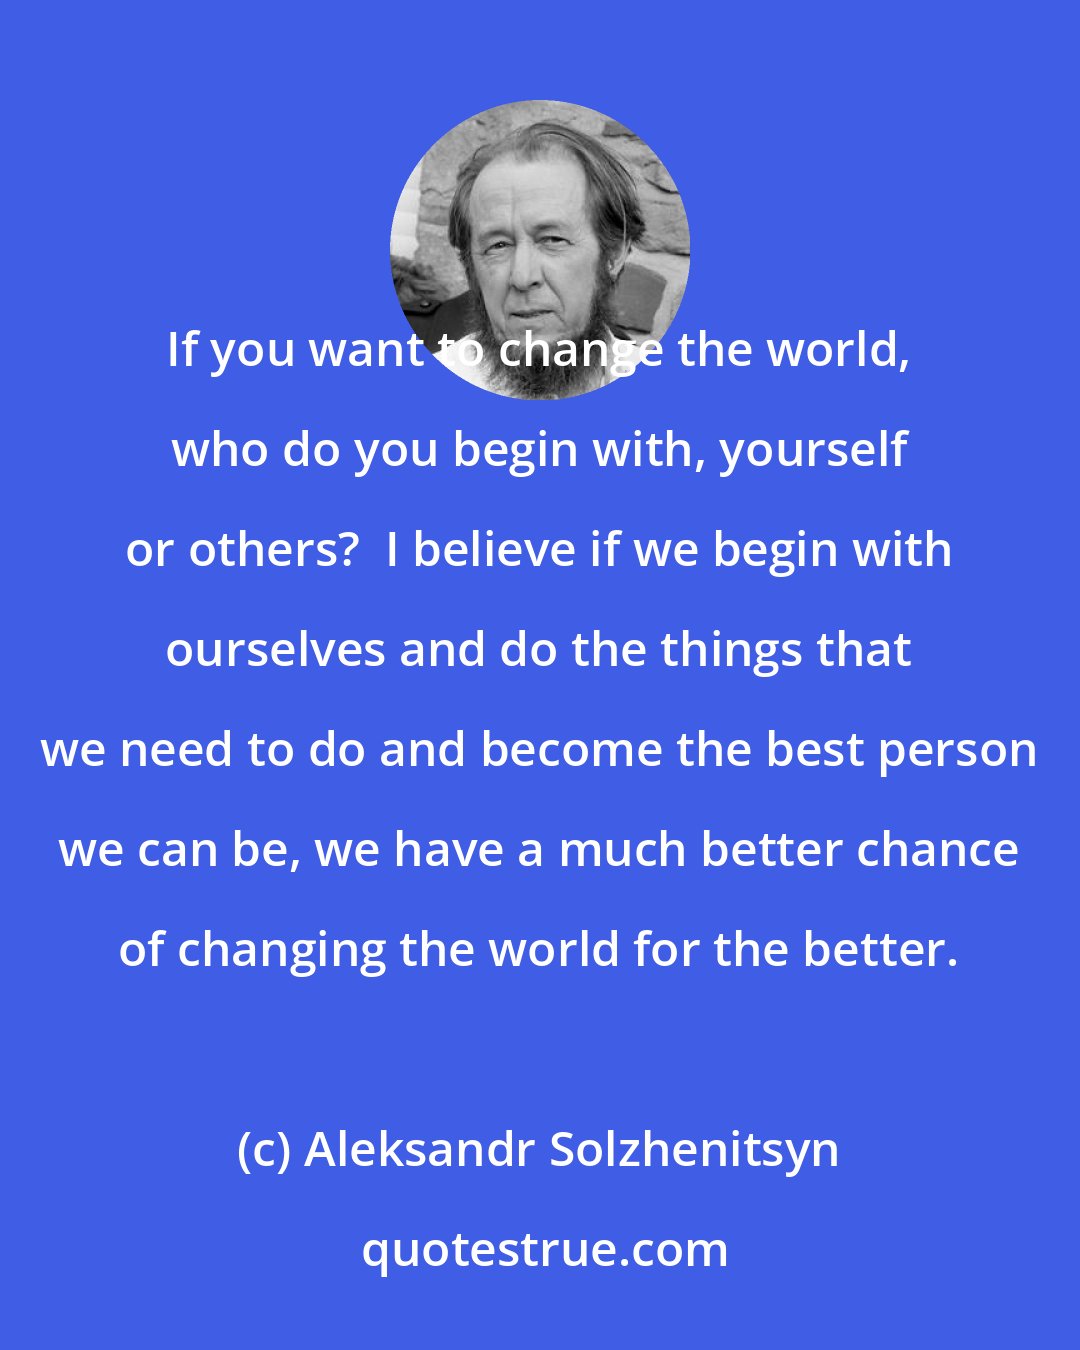 Aleksandr Solzhenitsyn: If you want to change the world, who do you begin with, yourself or others?  I believe if we begin with ourselves and do the things that we need to do and become the best person we can be, we have a much better chance of changing the world for the better.